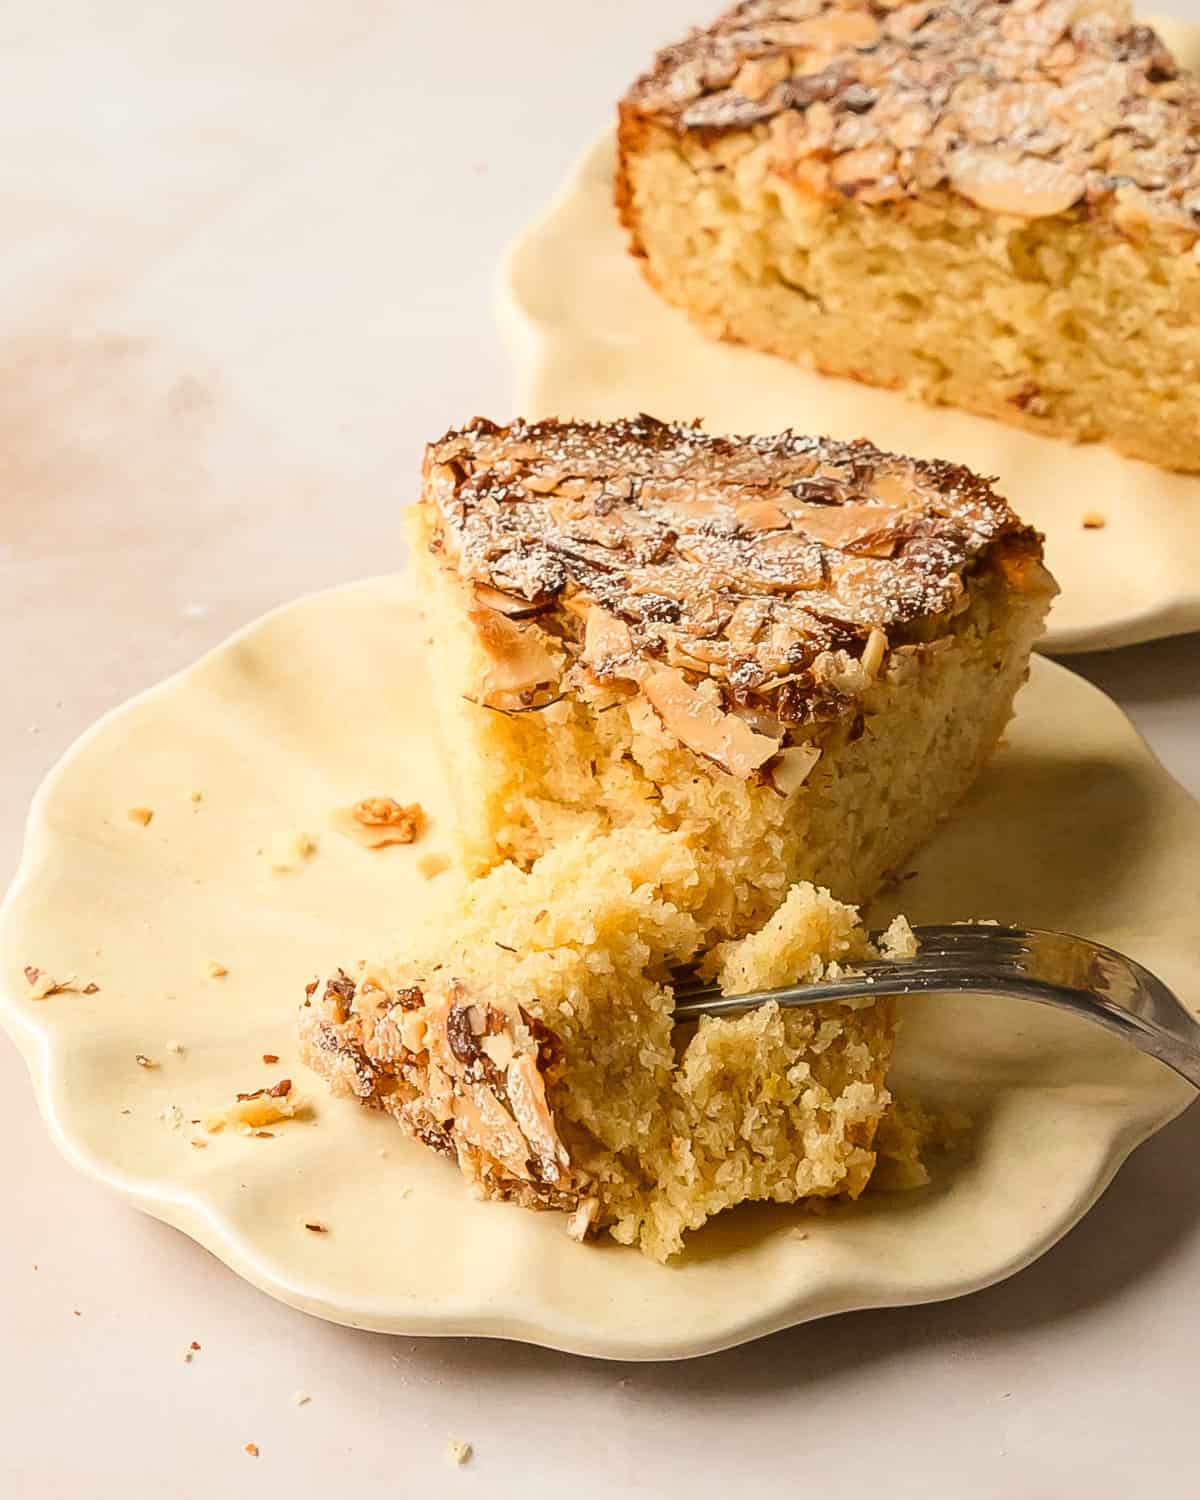 Cardamom cake is a traditional Swedish cardamom cake. This simple cardamom dessert has a buttery soft crumb and with a crunchy almond topping. Make this wonderfully easy cardamom cake recipe to pair with coffee or tea for your afternoon fika.